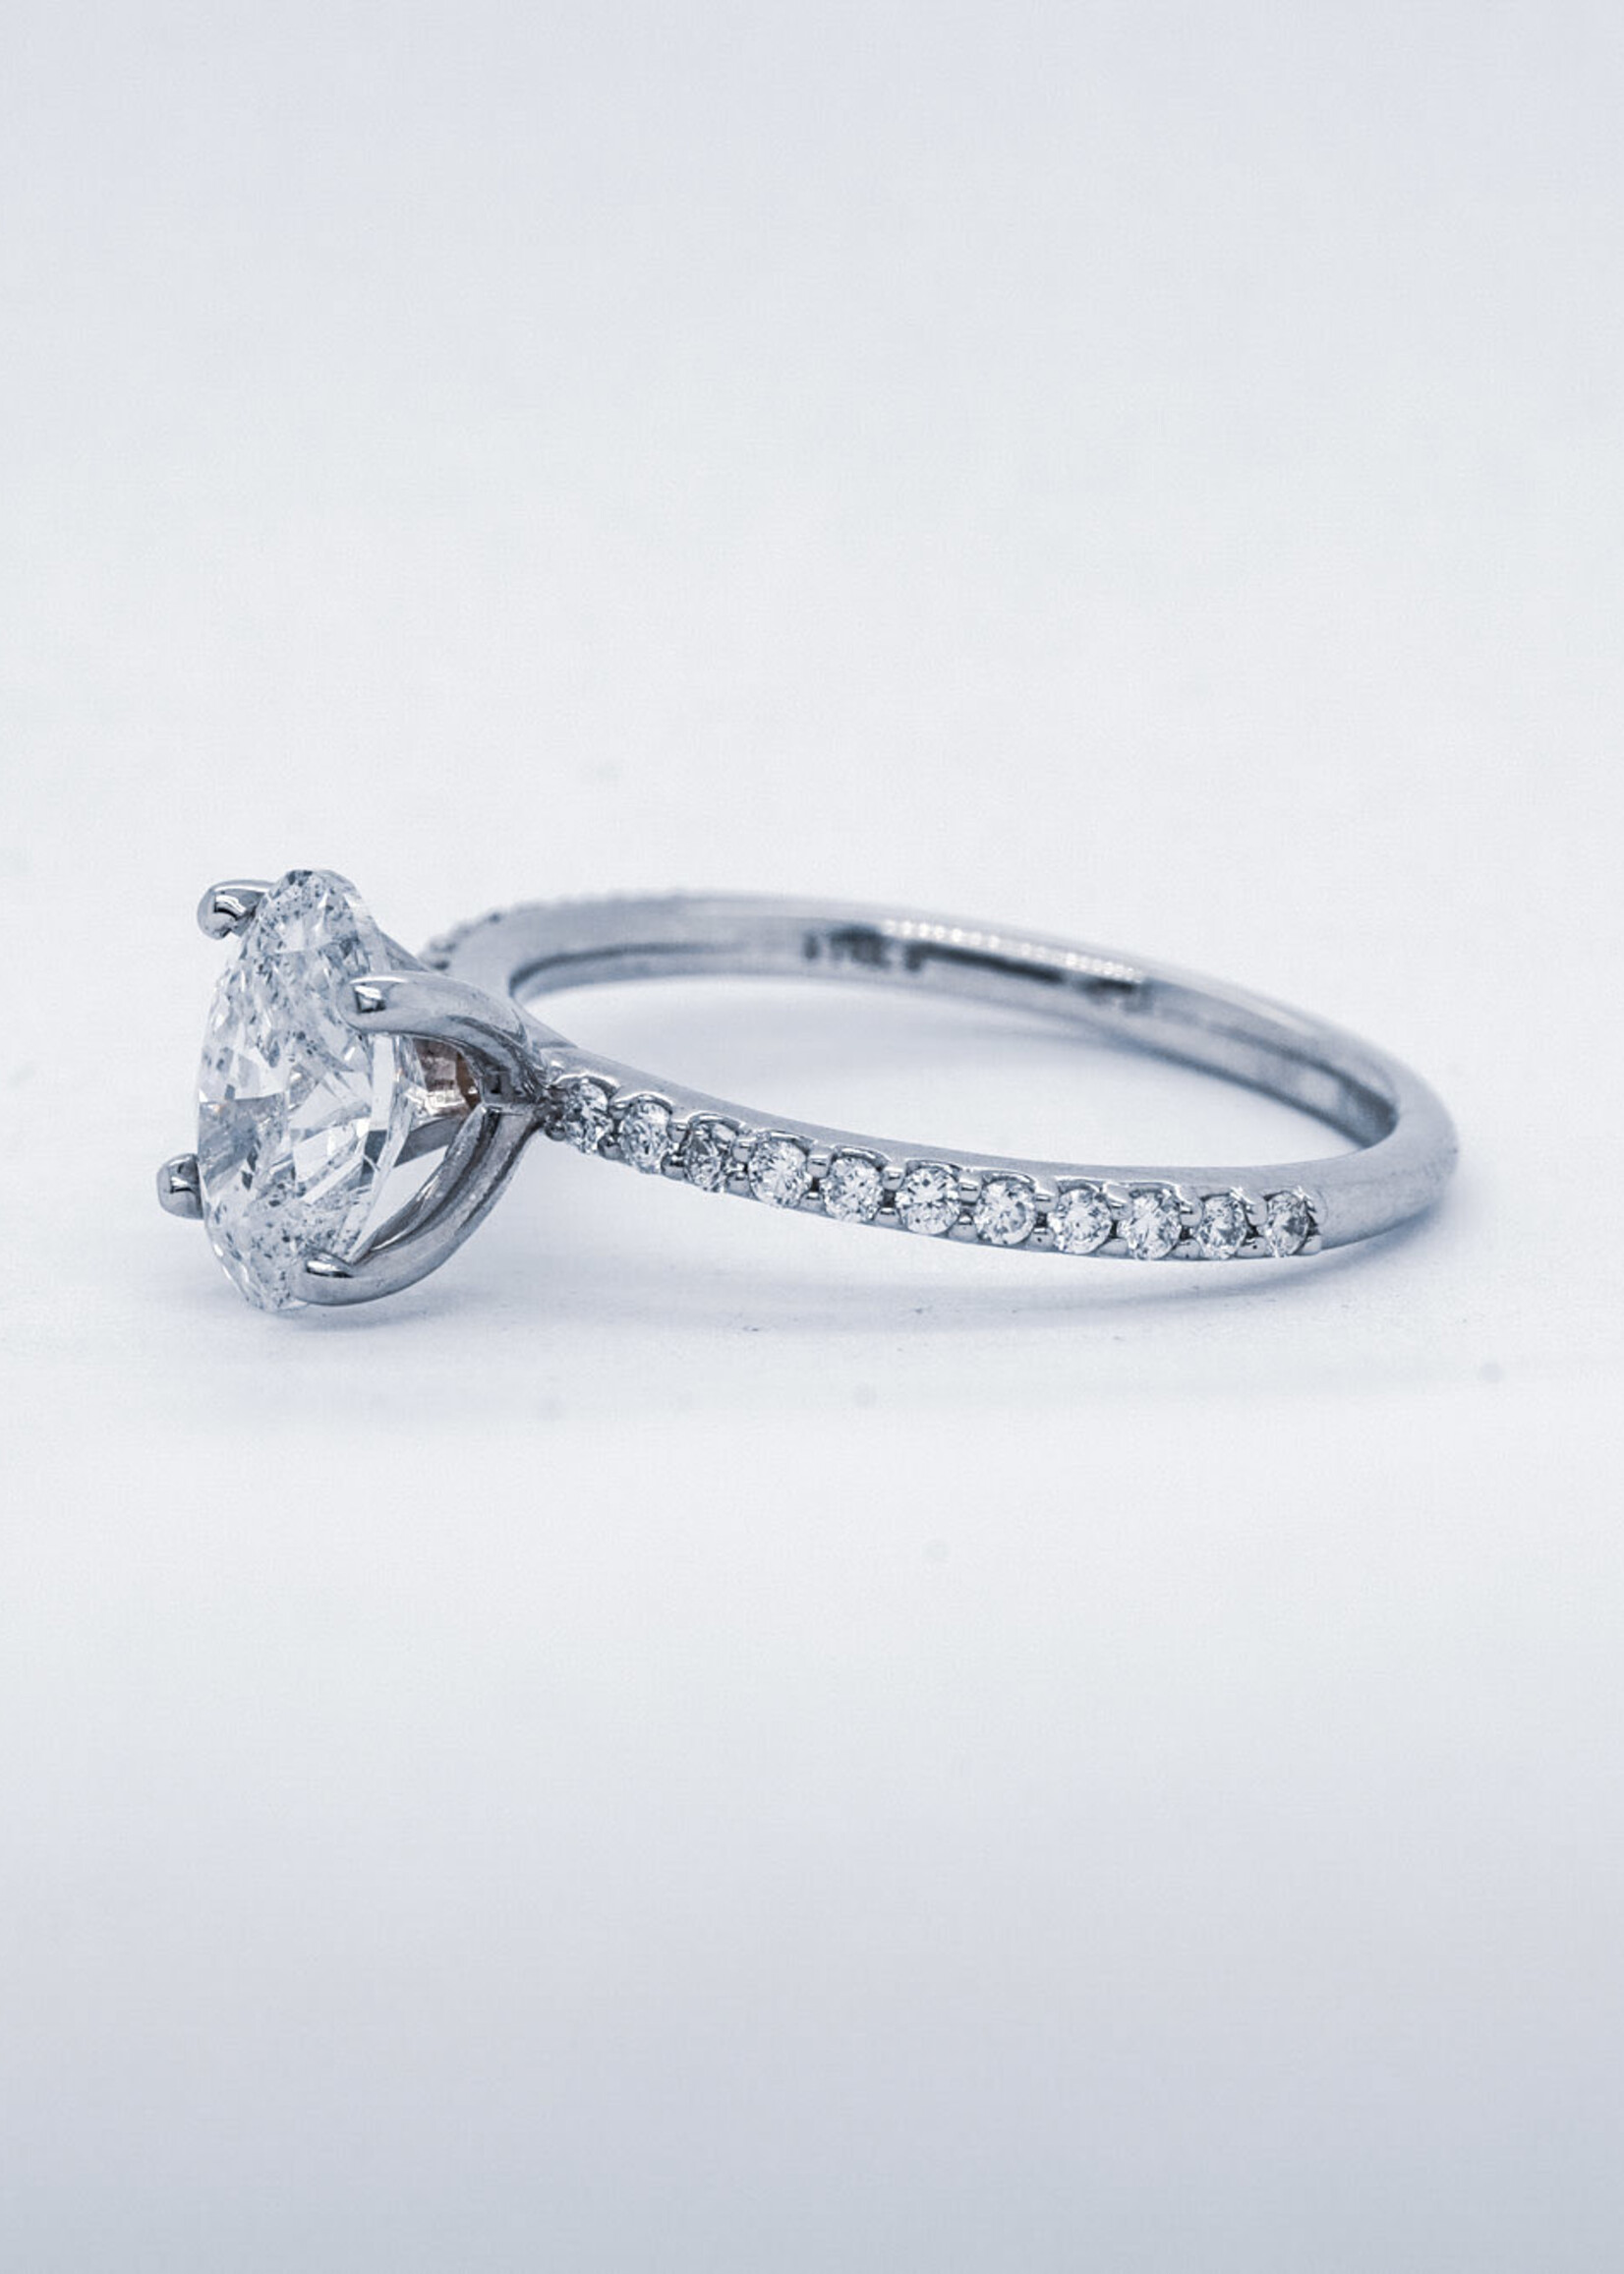 14KW 2.51g 1.74ctw (1.52ctr) E/SI2 Oval Diamond Engagement Ring (size 7)